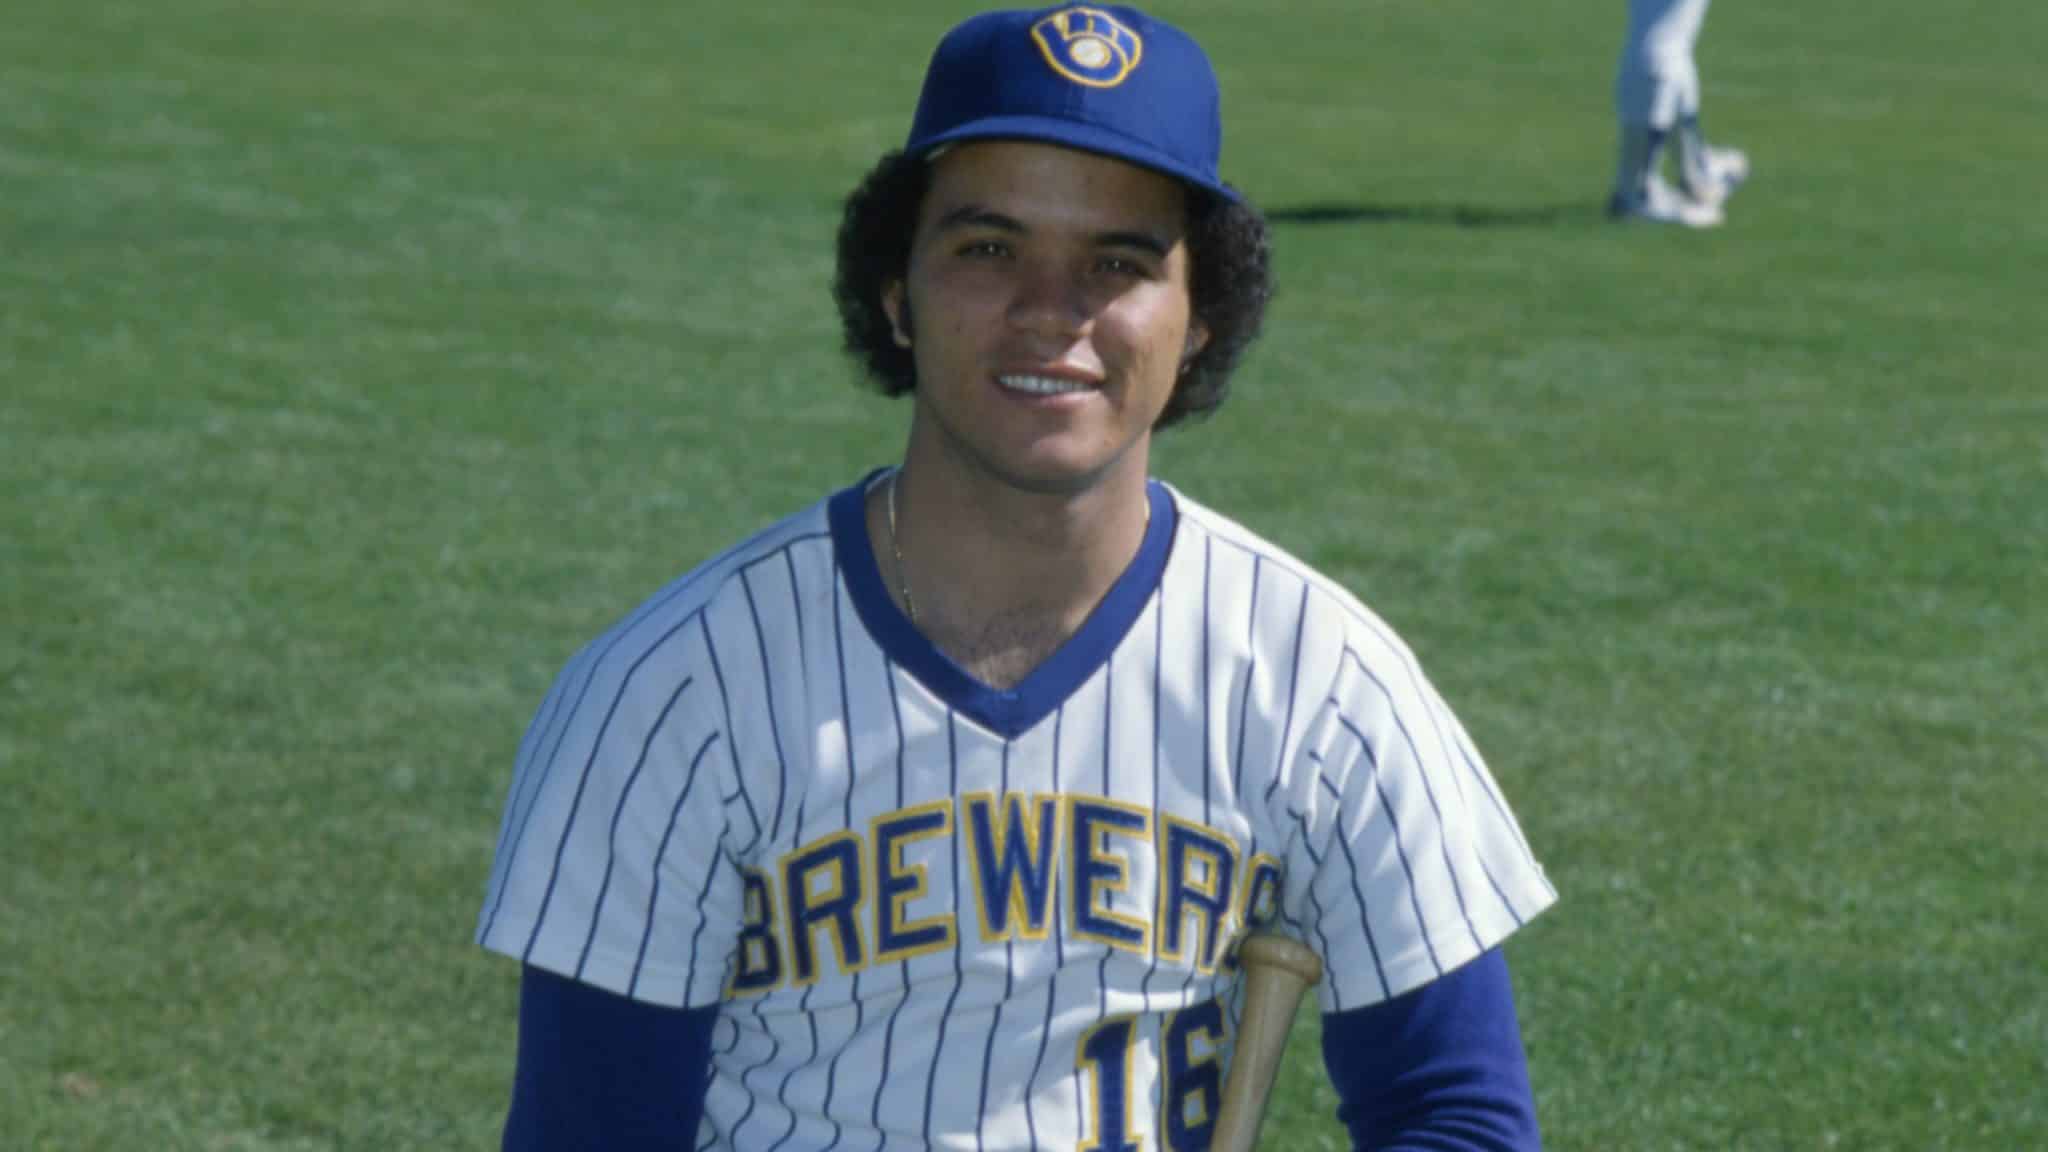 Sixto Lezcano gave fans many wonderful memories in his seven years with the Brewers